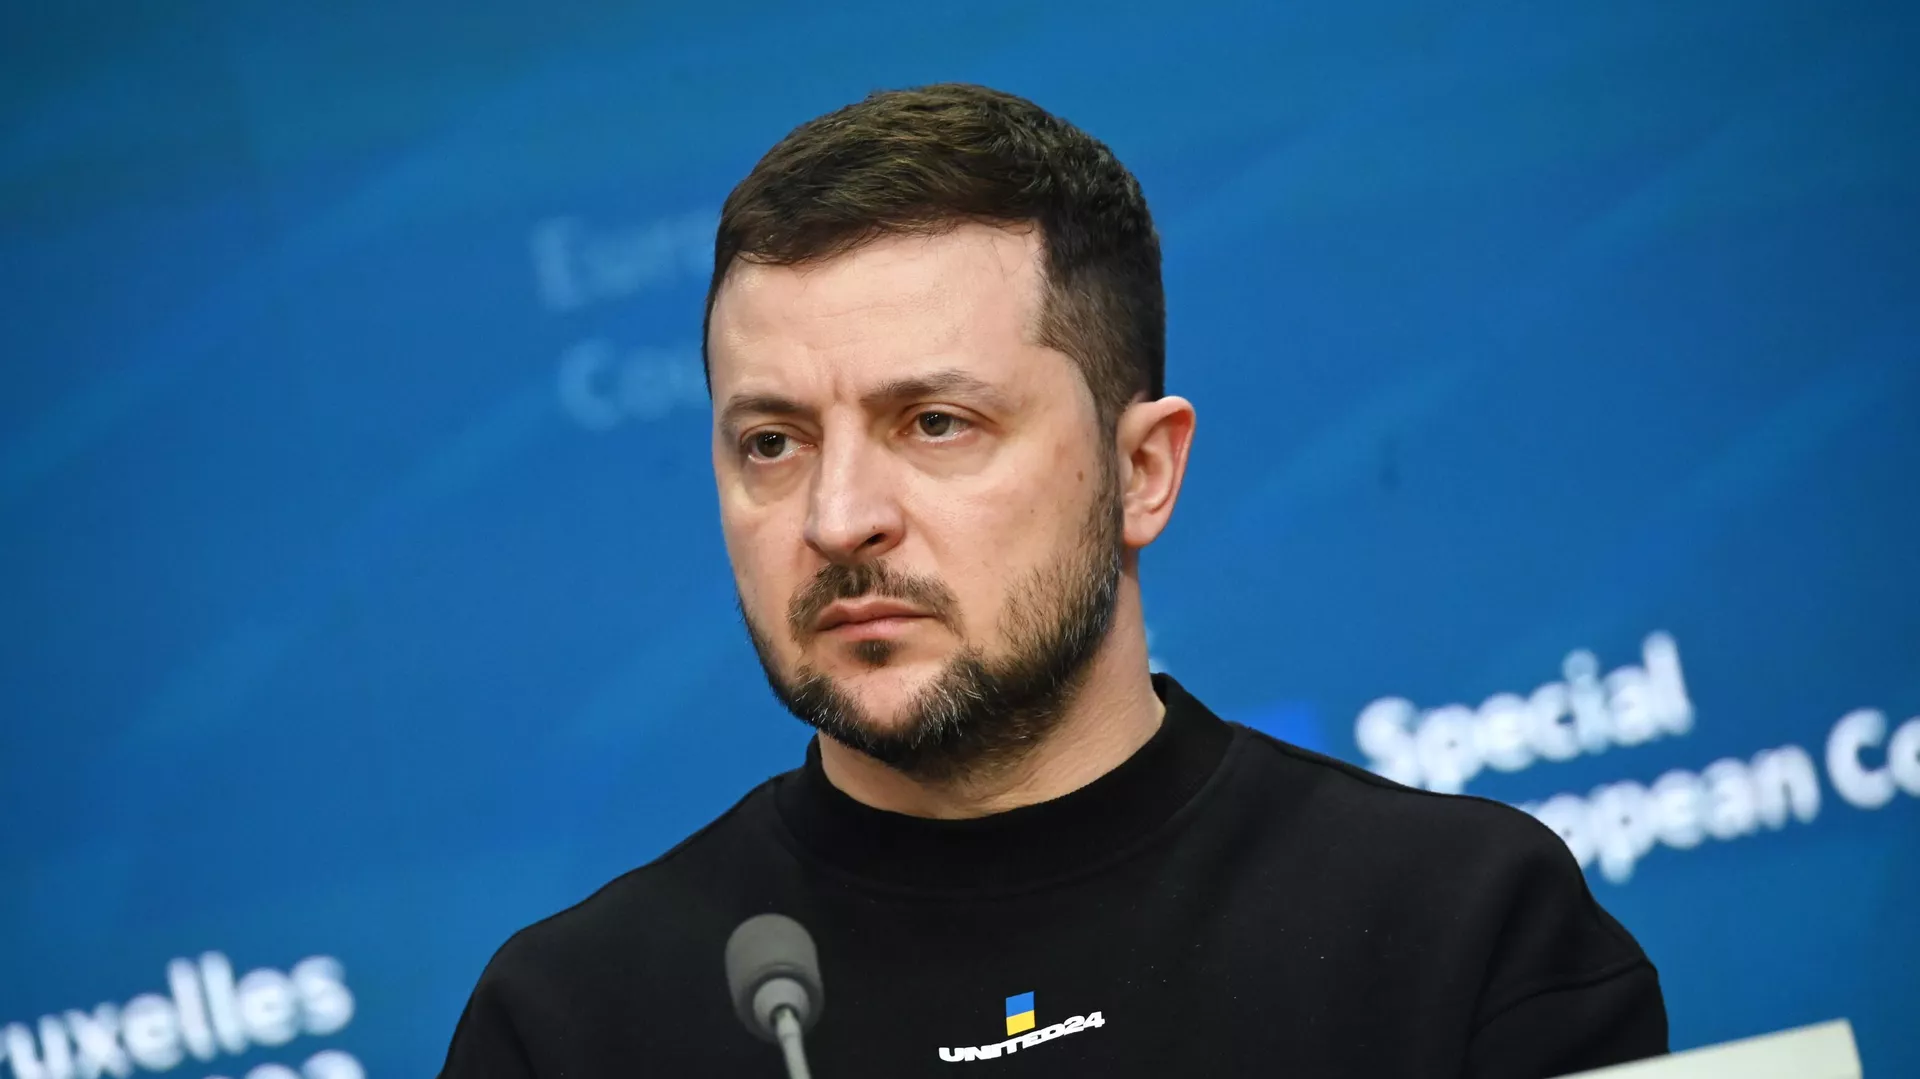 Former CIA intelligence officer: The United States plans to eliminate Zelensky and blame Russia